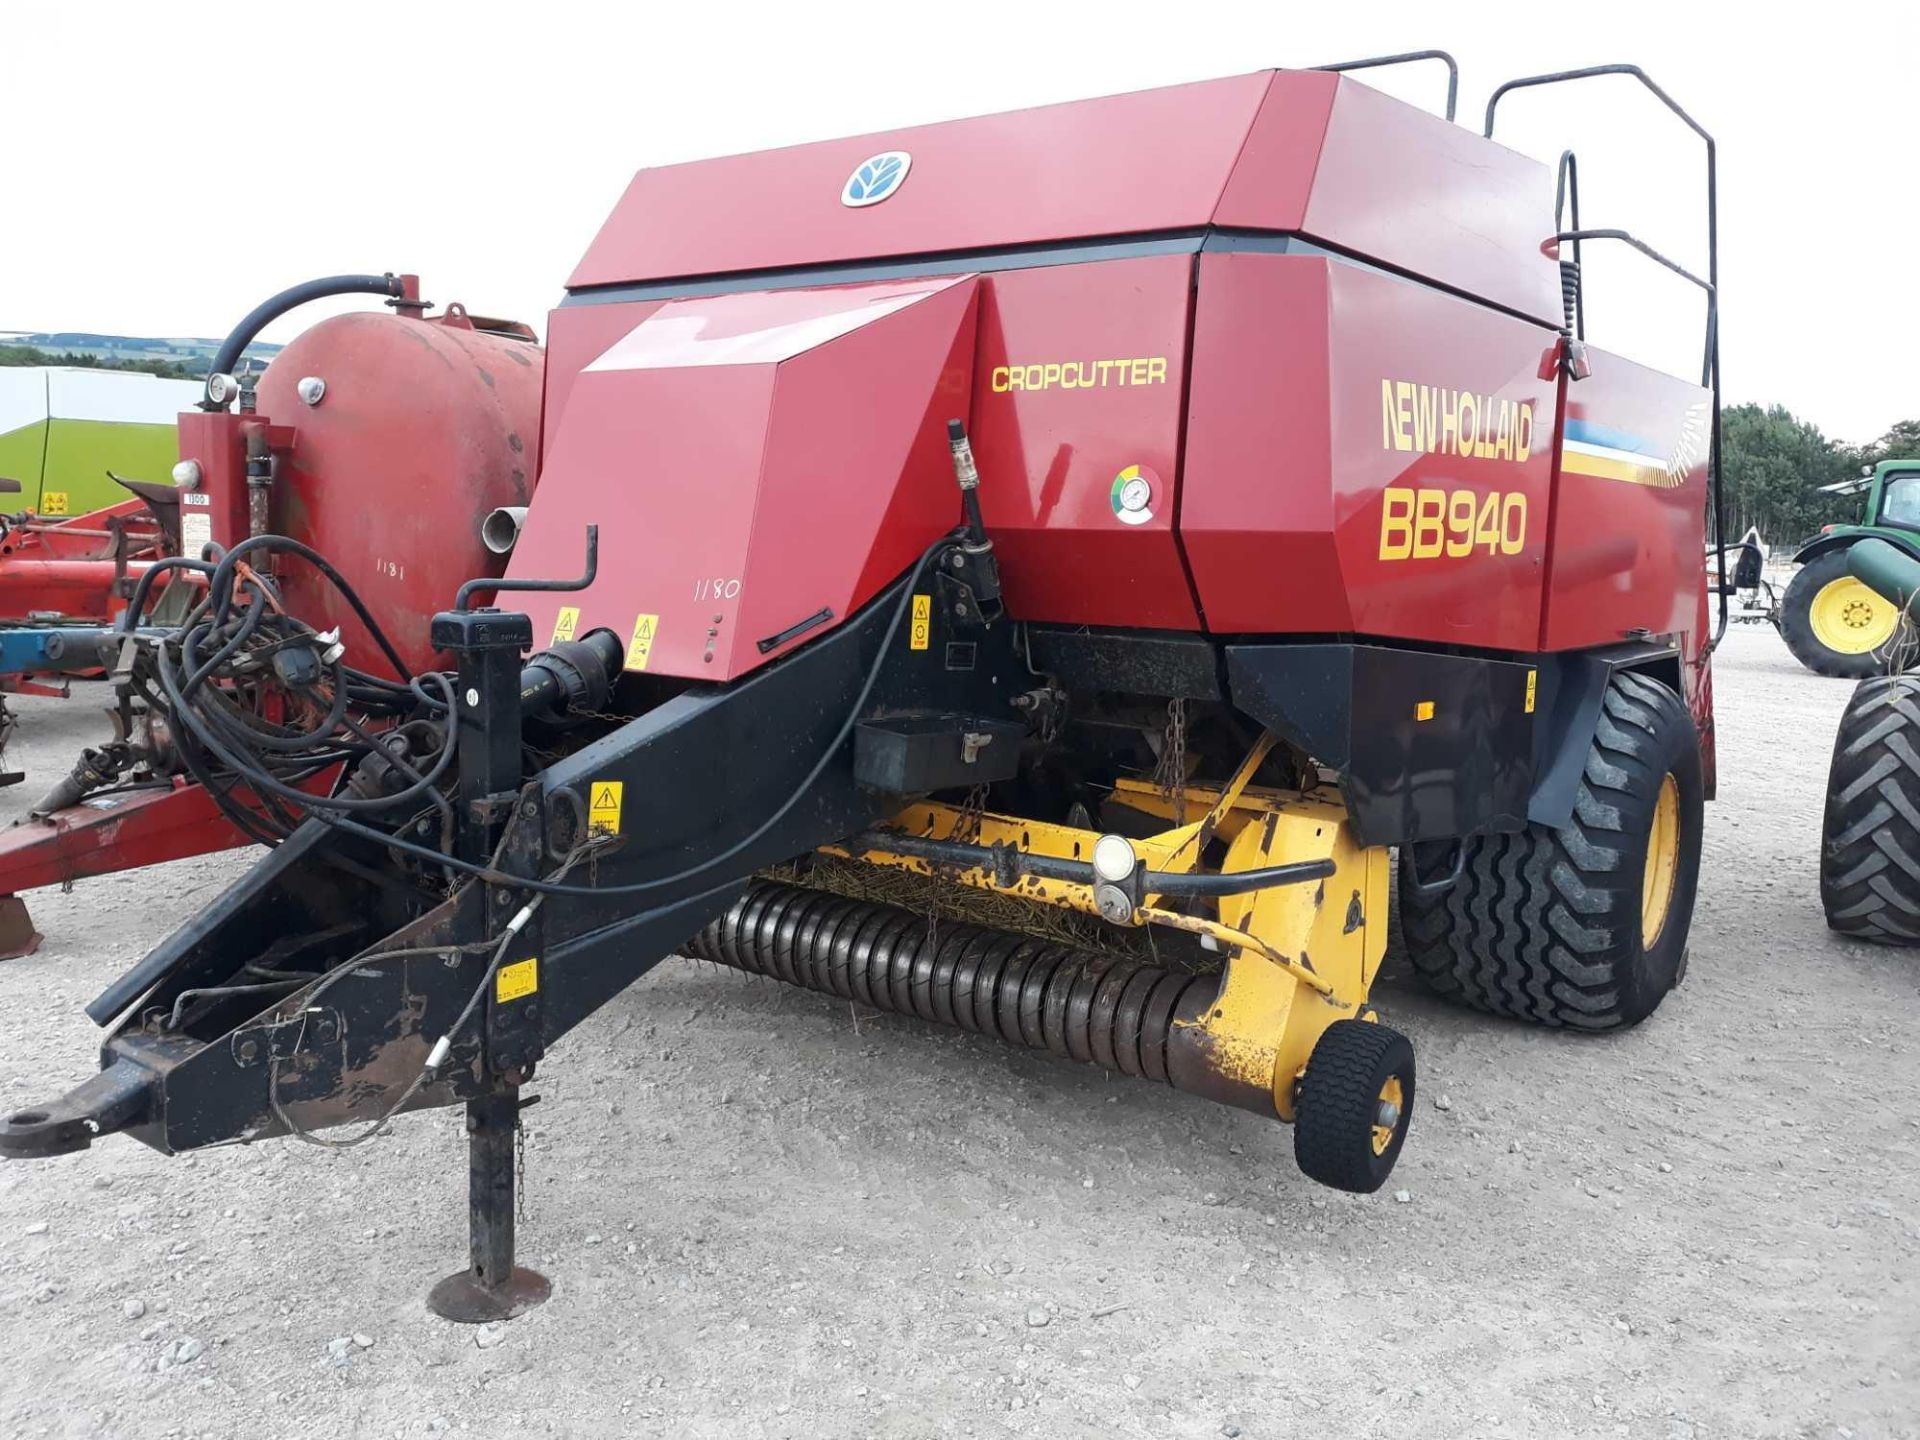 NEW HOLLAND BB940 BALER WITH PTO